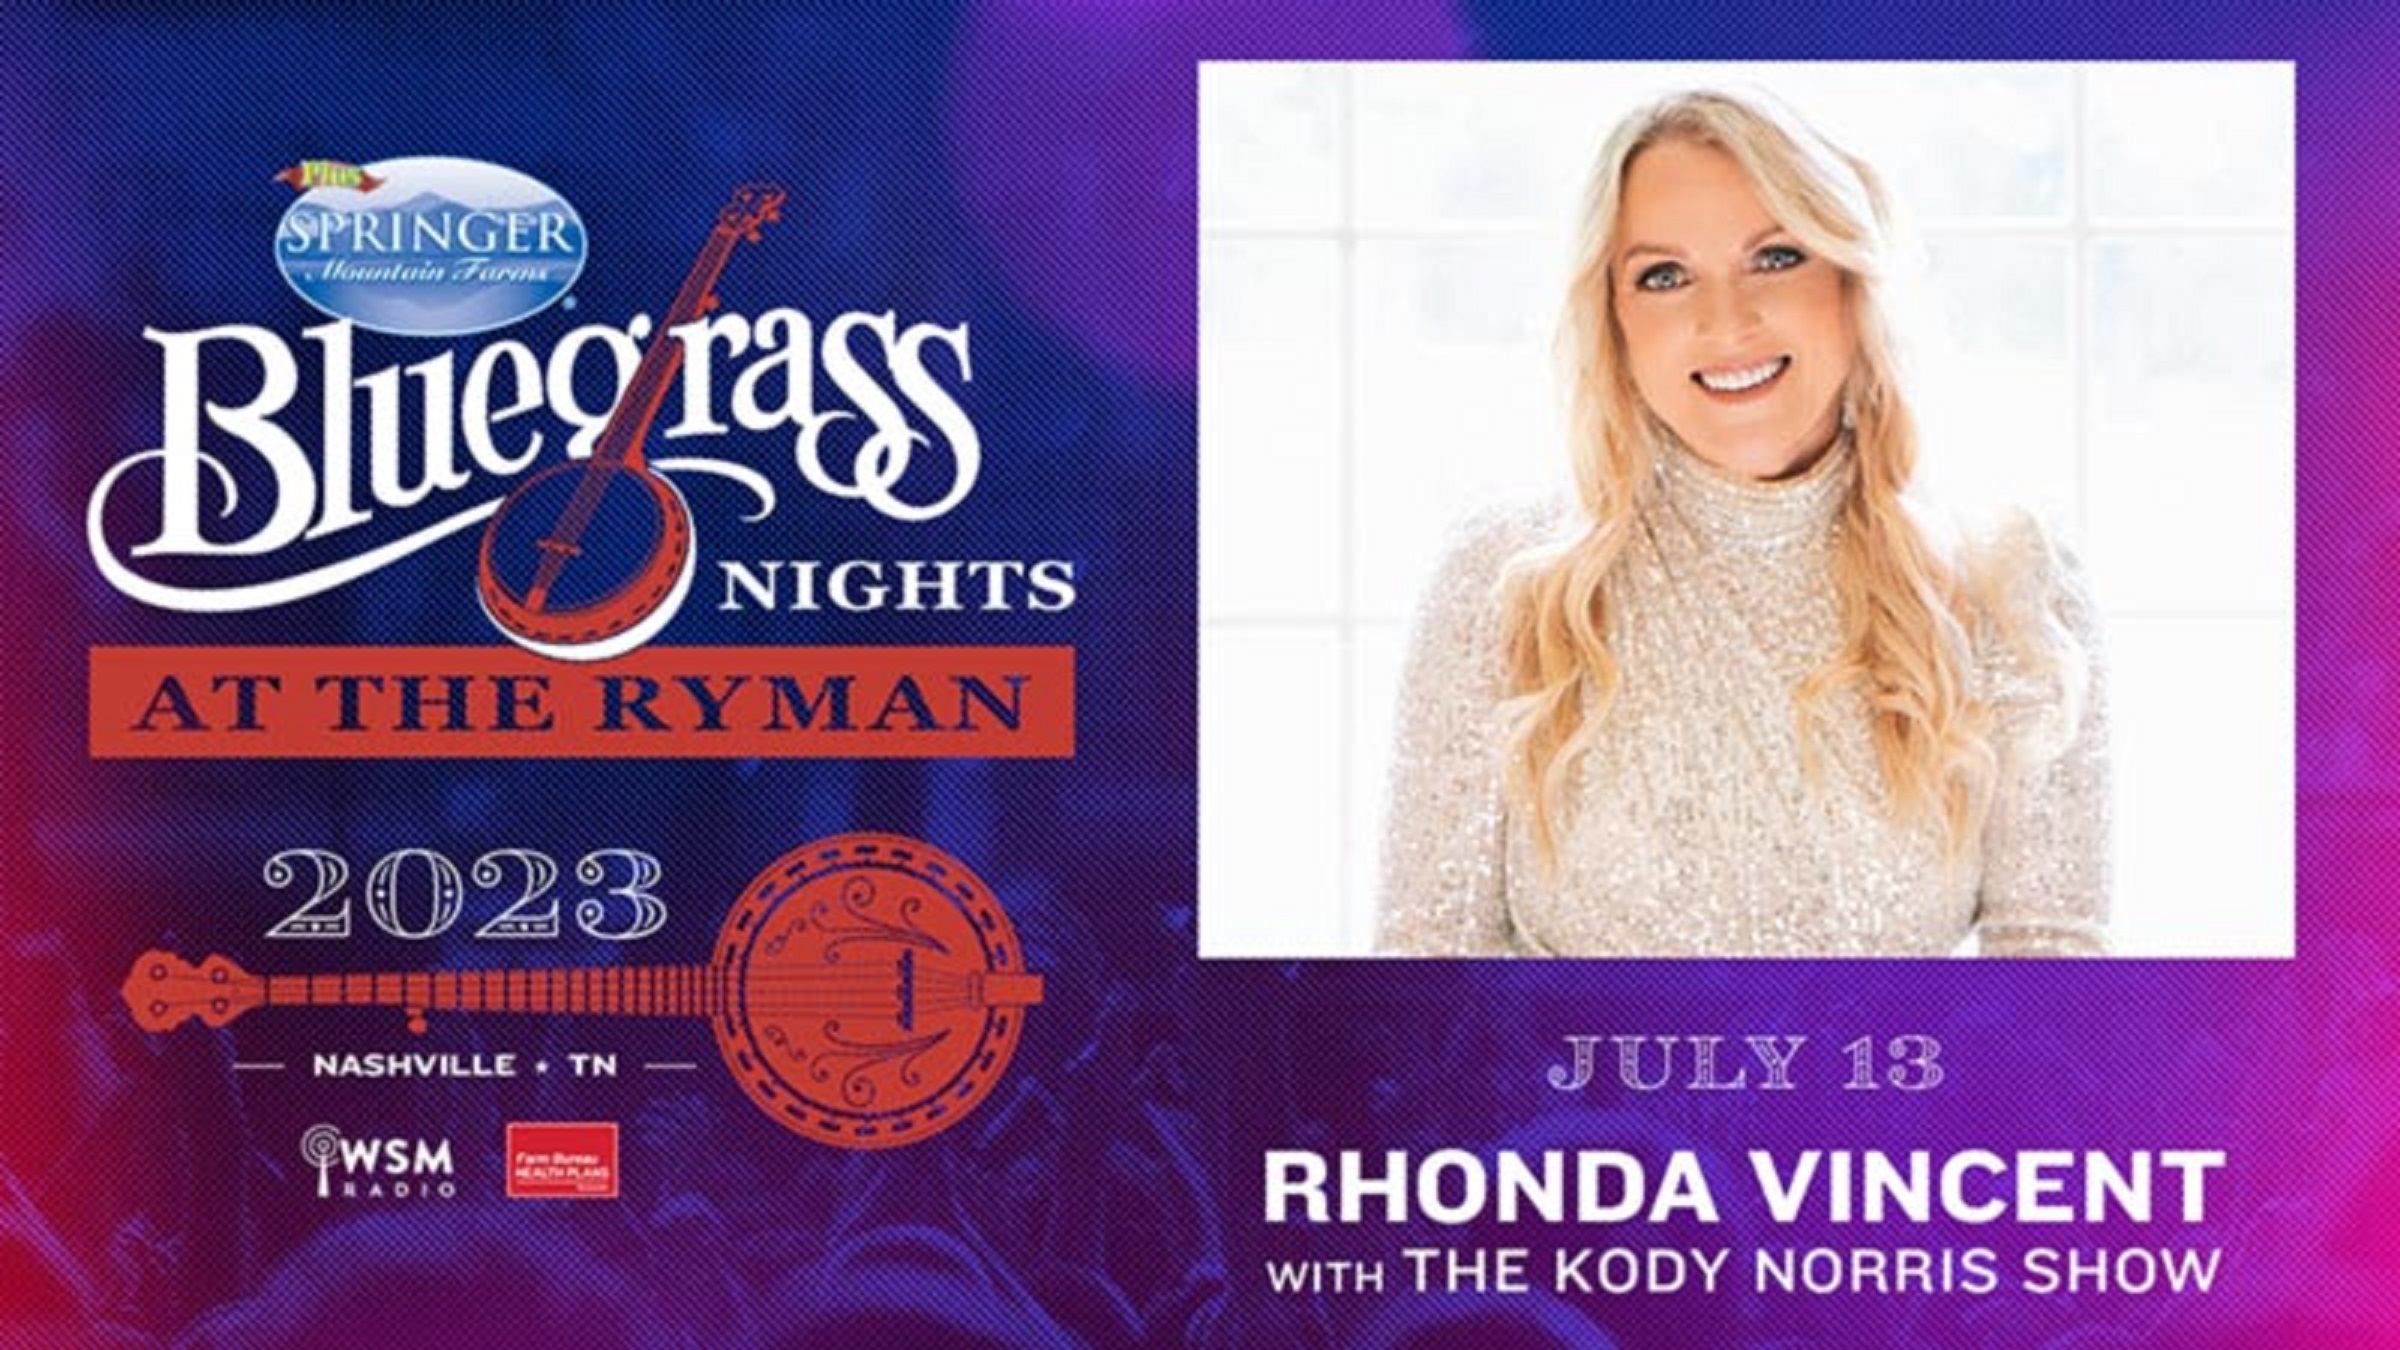 Rhonda Vincent & The Rage To Headline Springer Mountain Farms Bluegrass Nights At The Ryman Thursday, July 13th